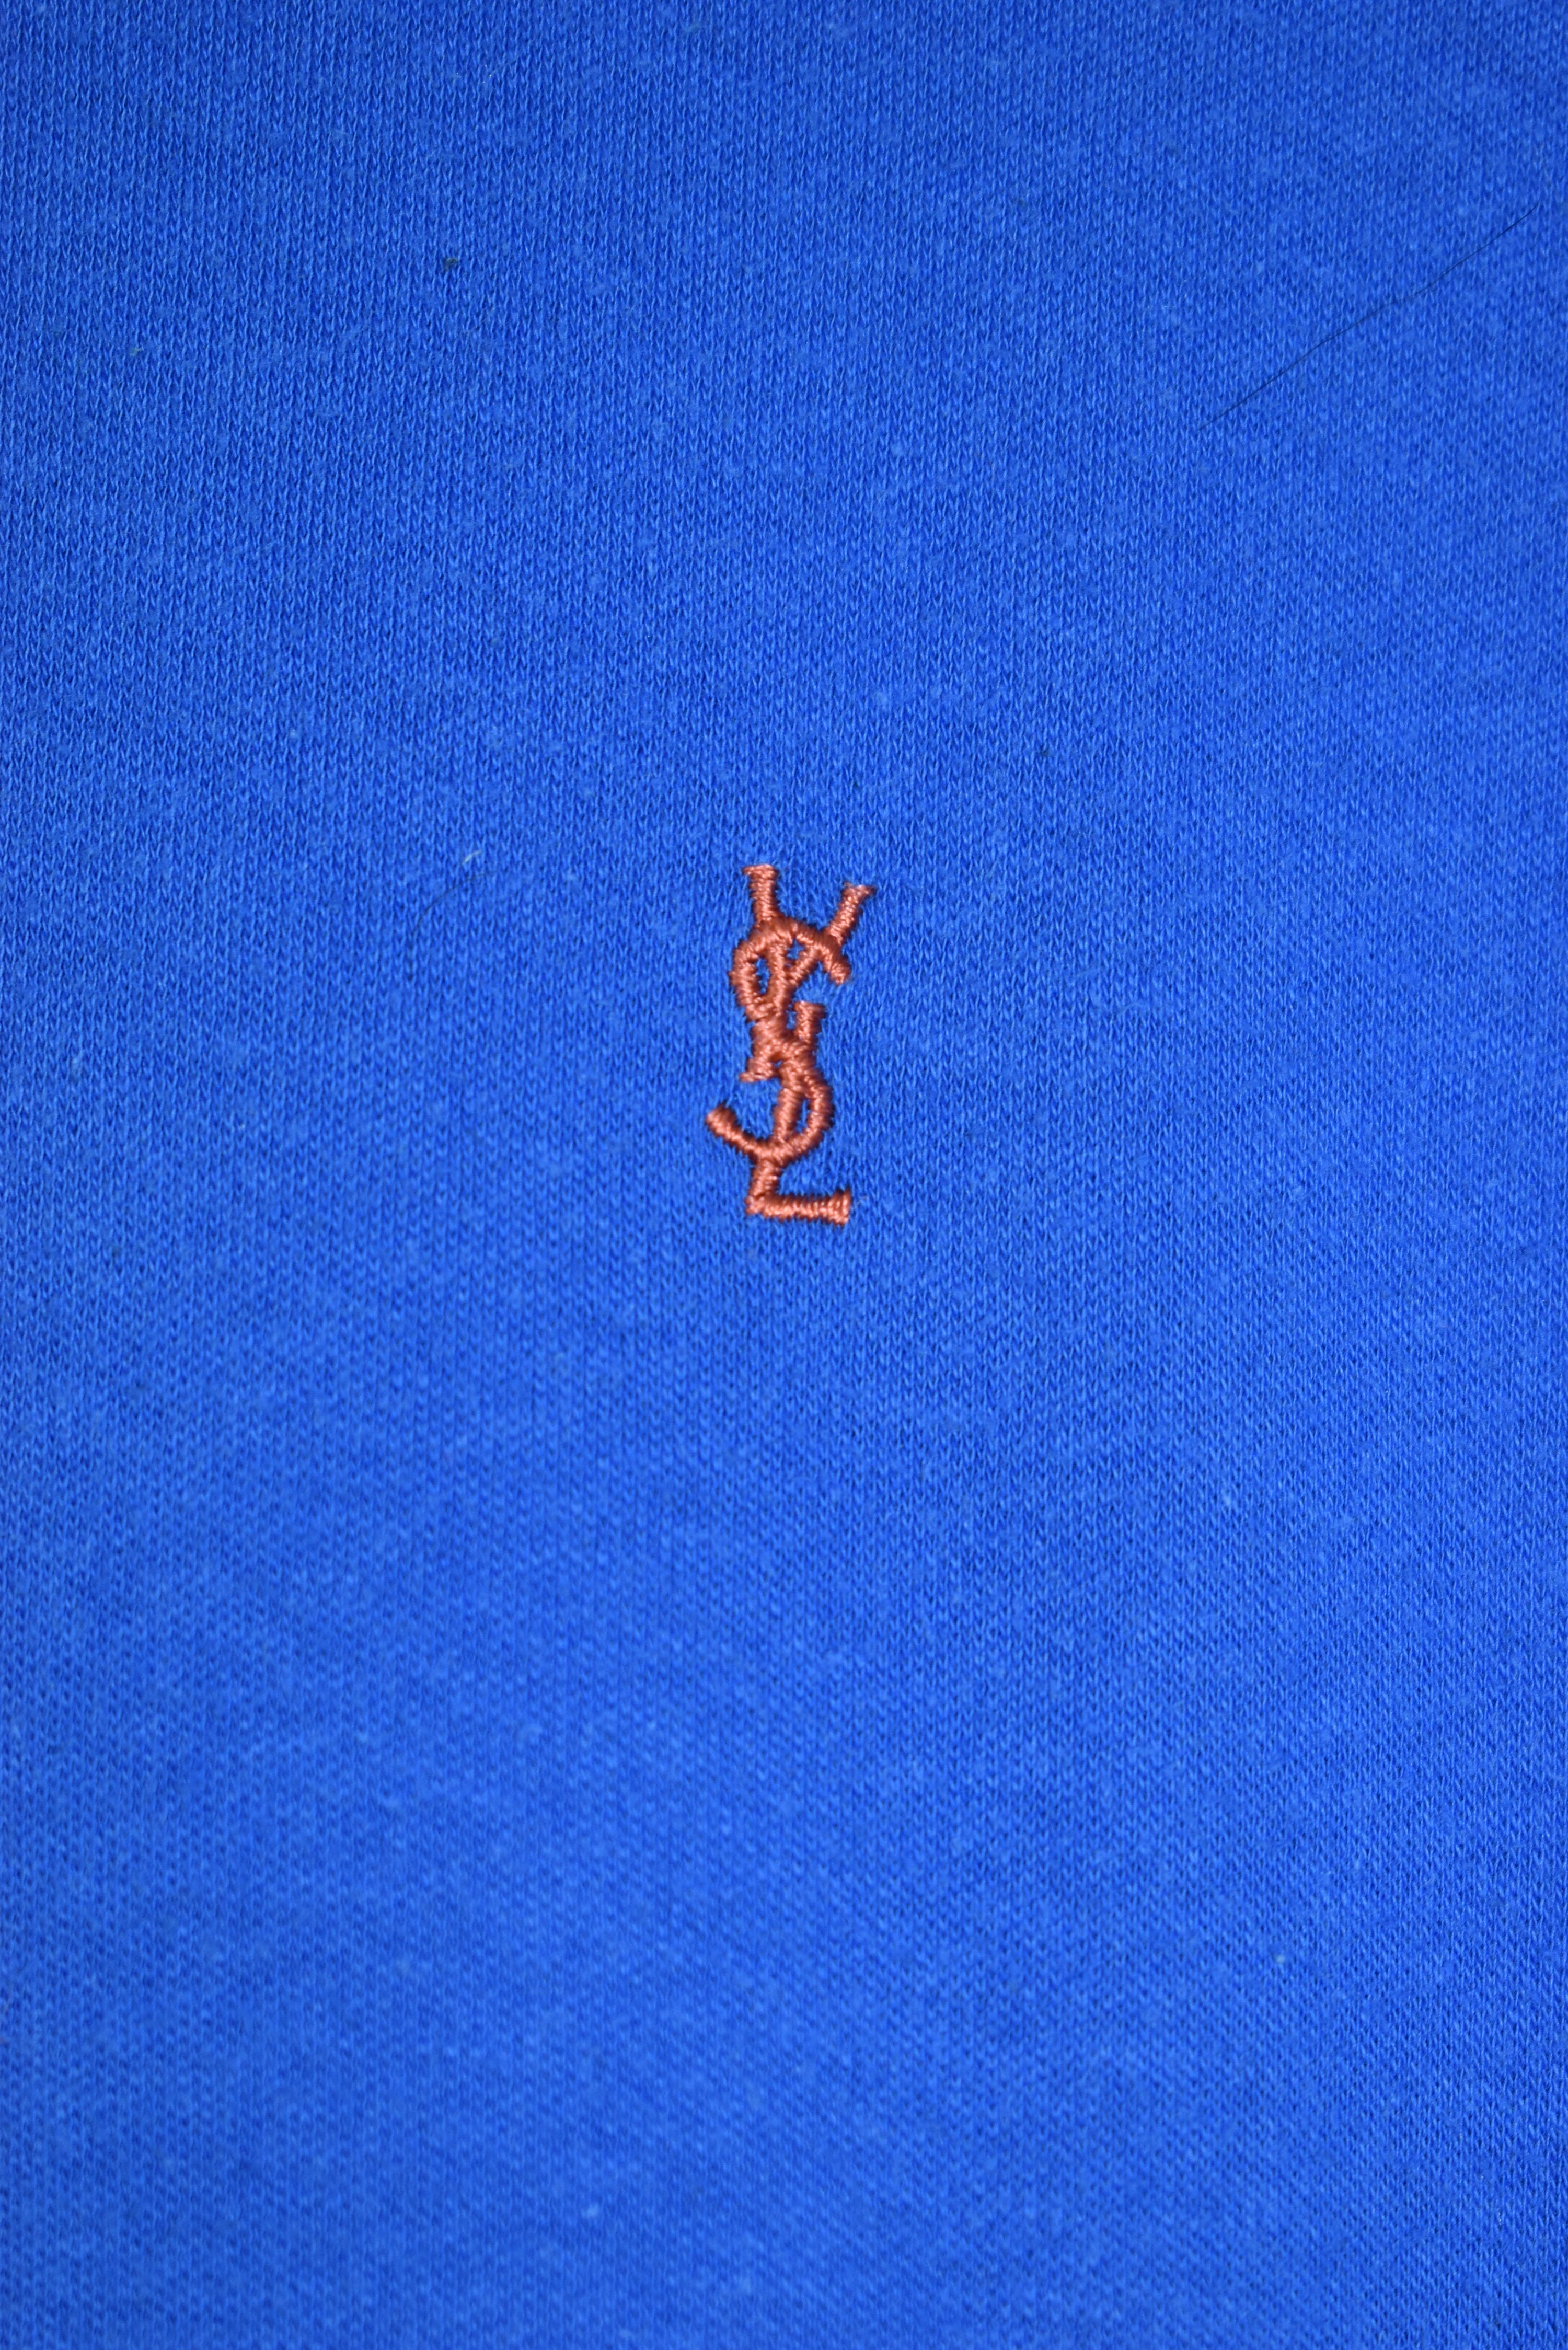 VINTAGE YSL EMBROIDERY SMALL LOGO 1/4 ZIP XLARGE